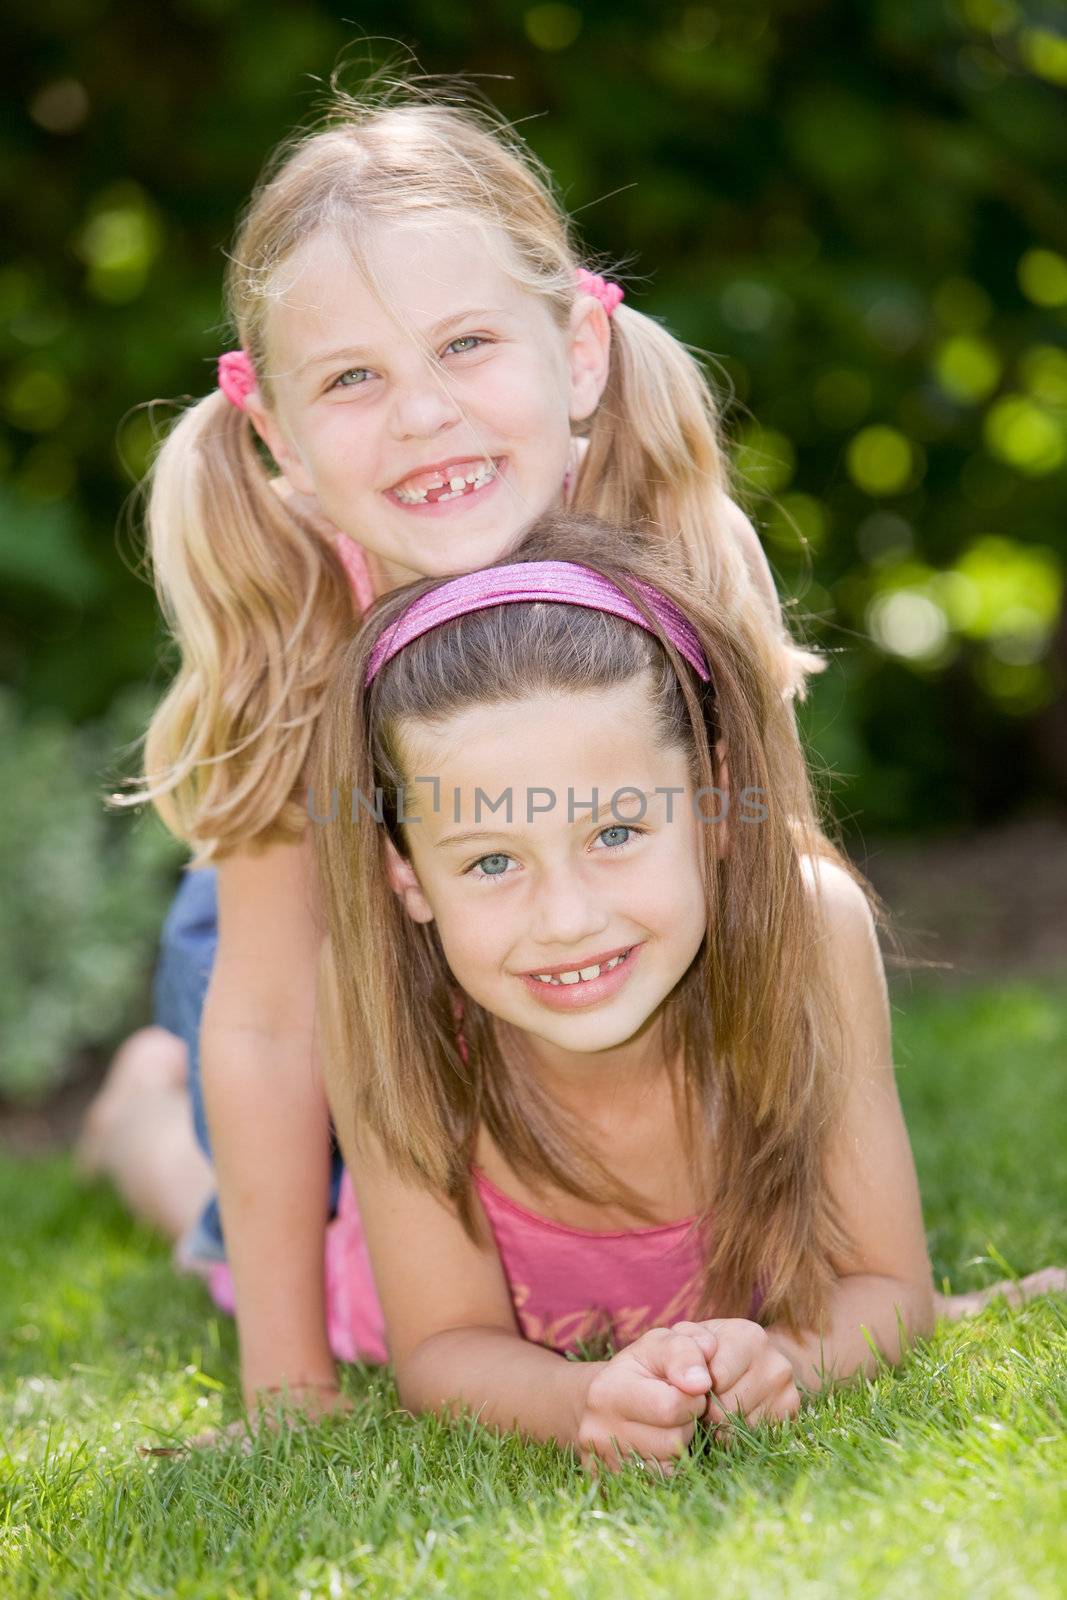 Two young girls having fun together outdoors